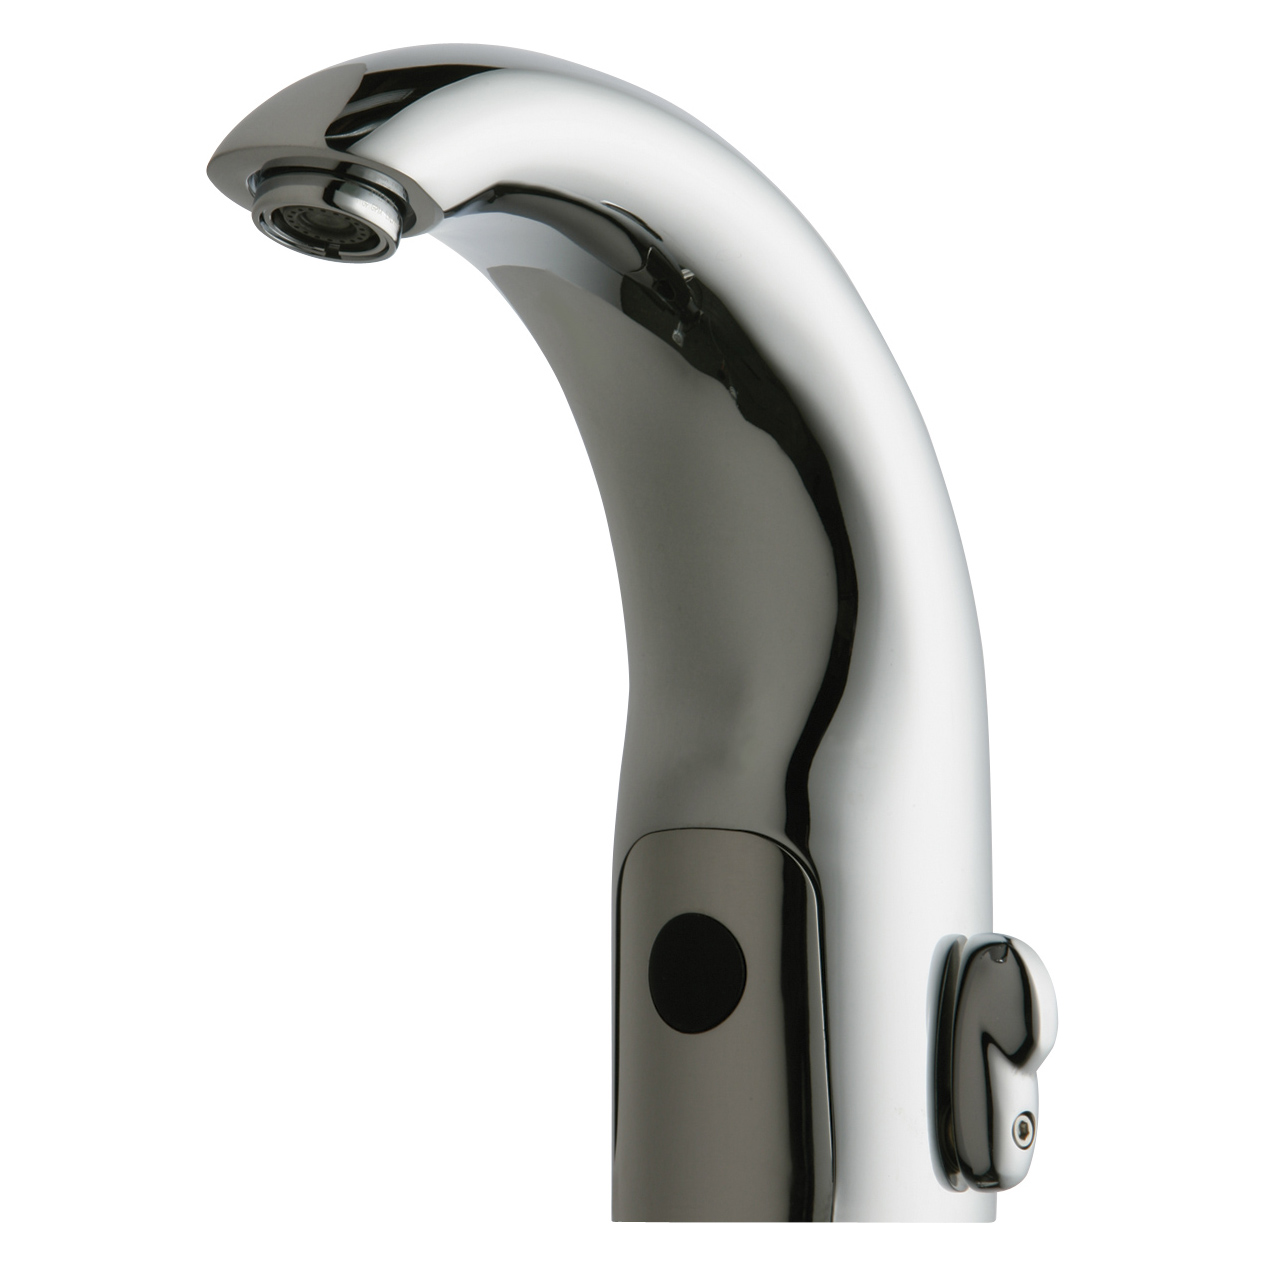 HyTronic Electronic Faucet In Chrome